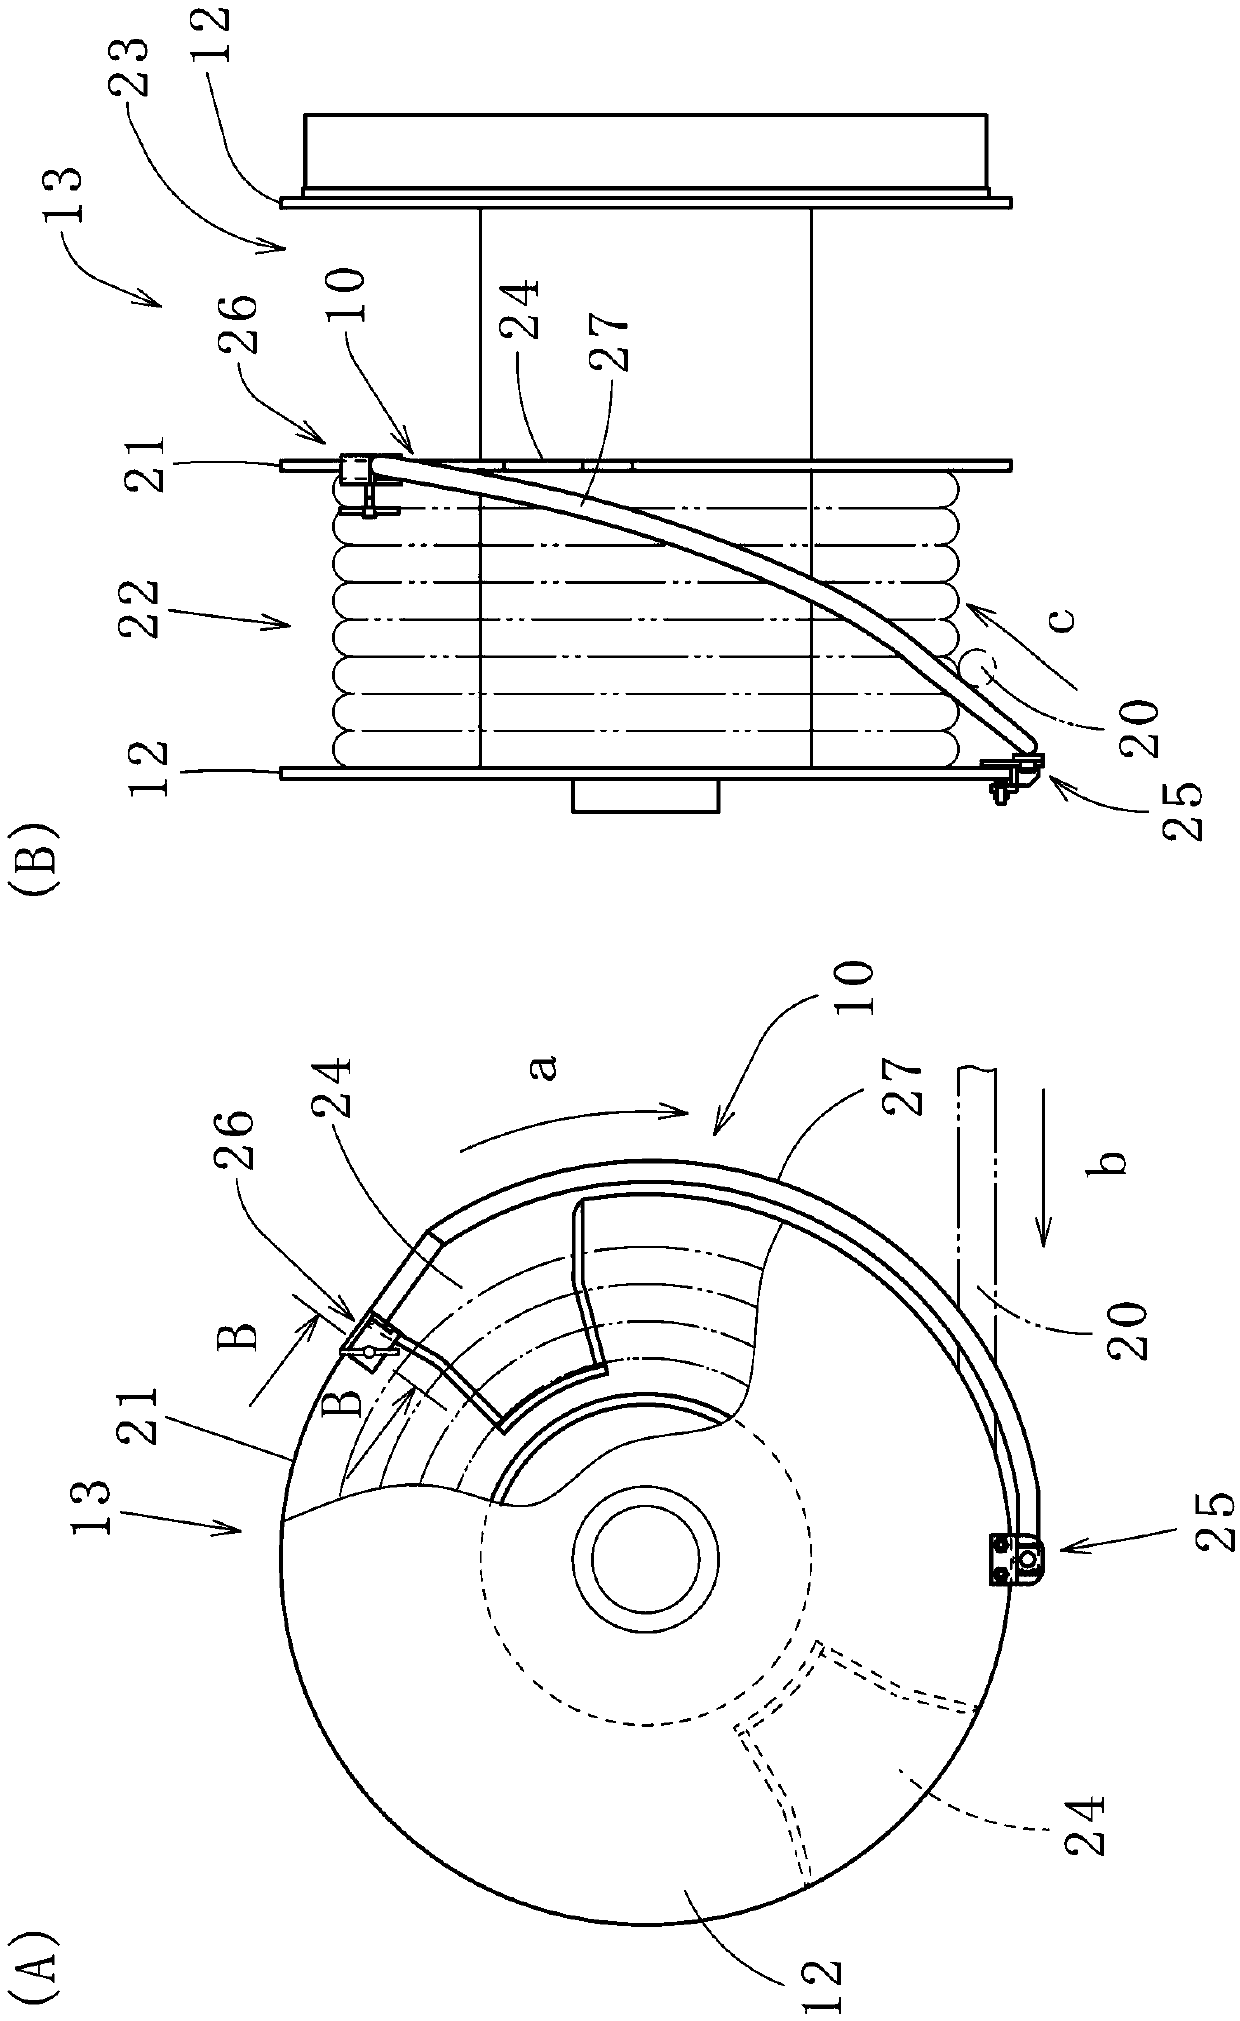 Shifting tool for mooring rope and mooring winch